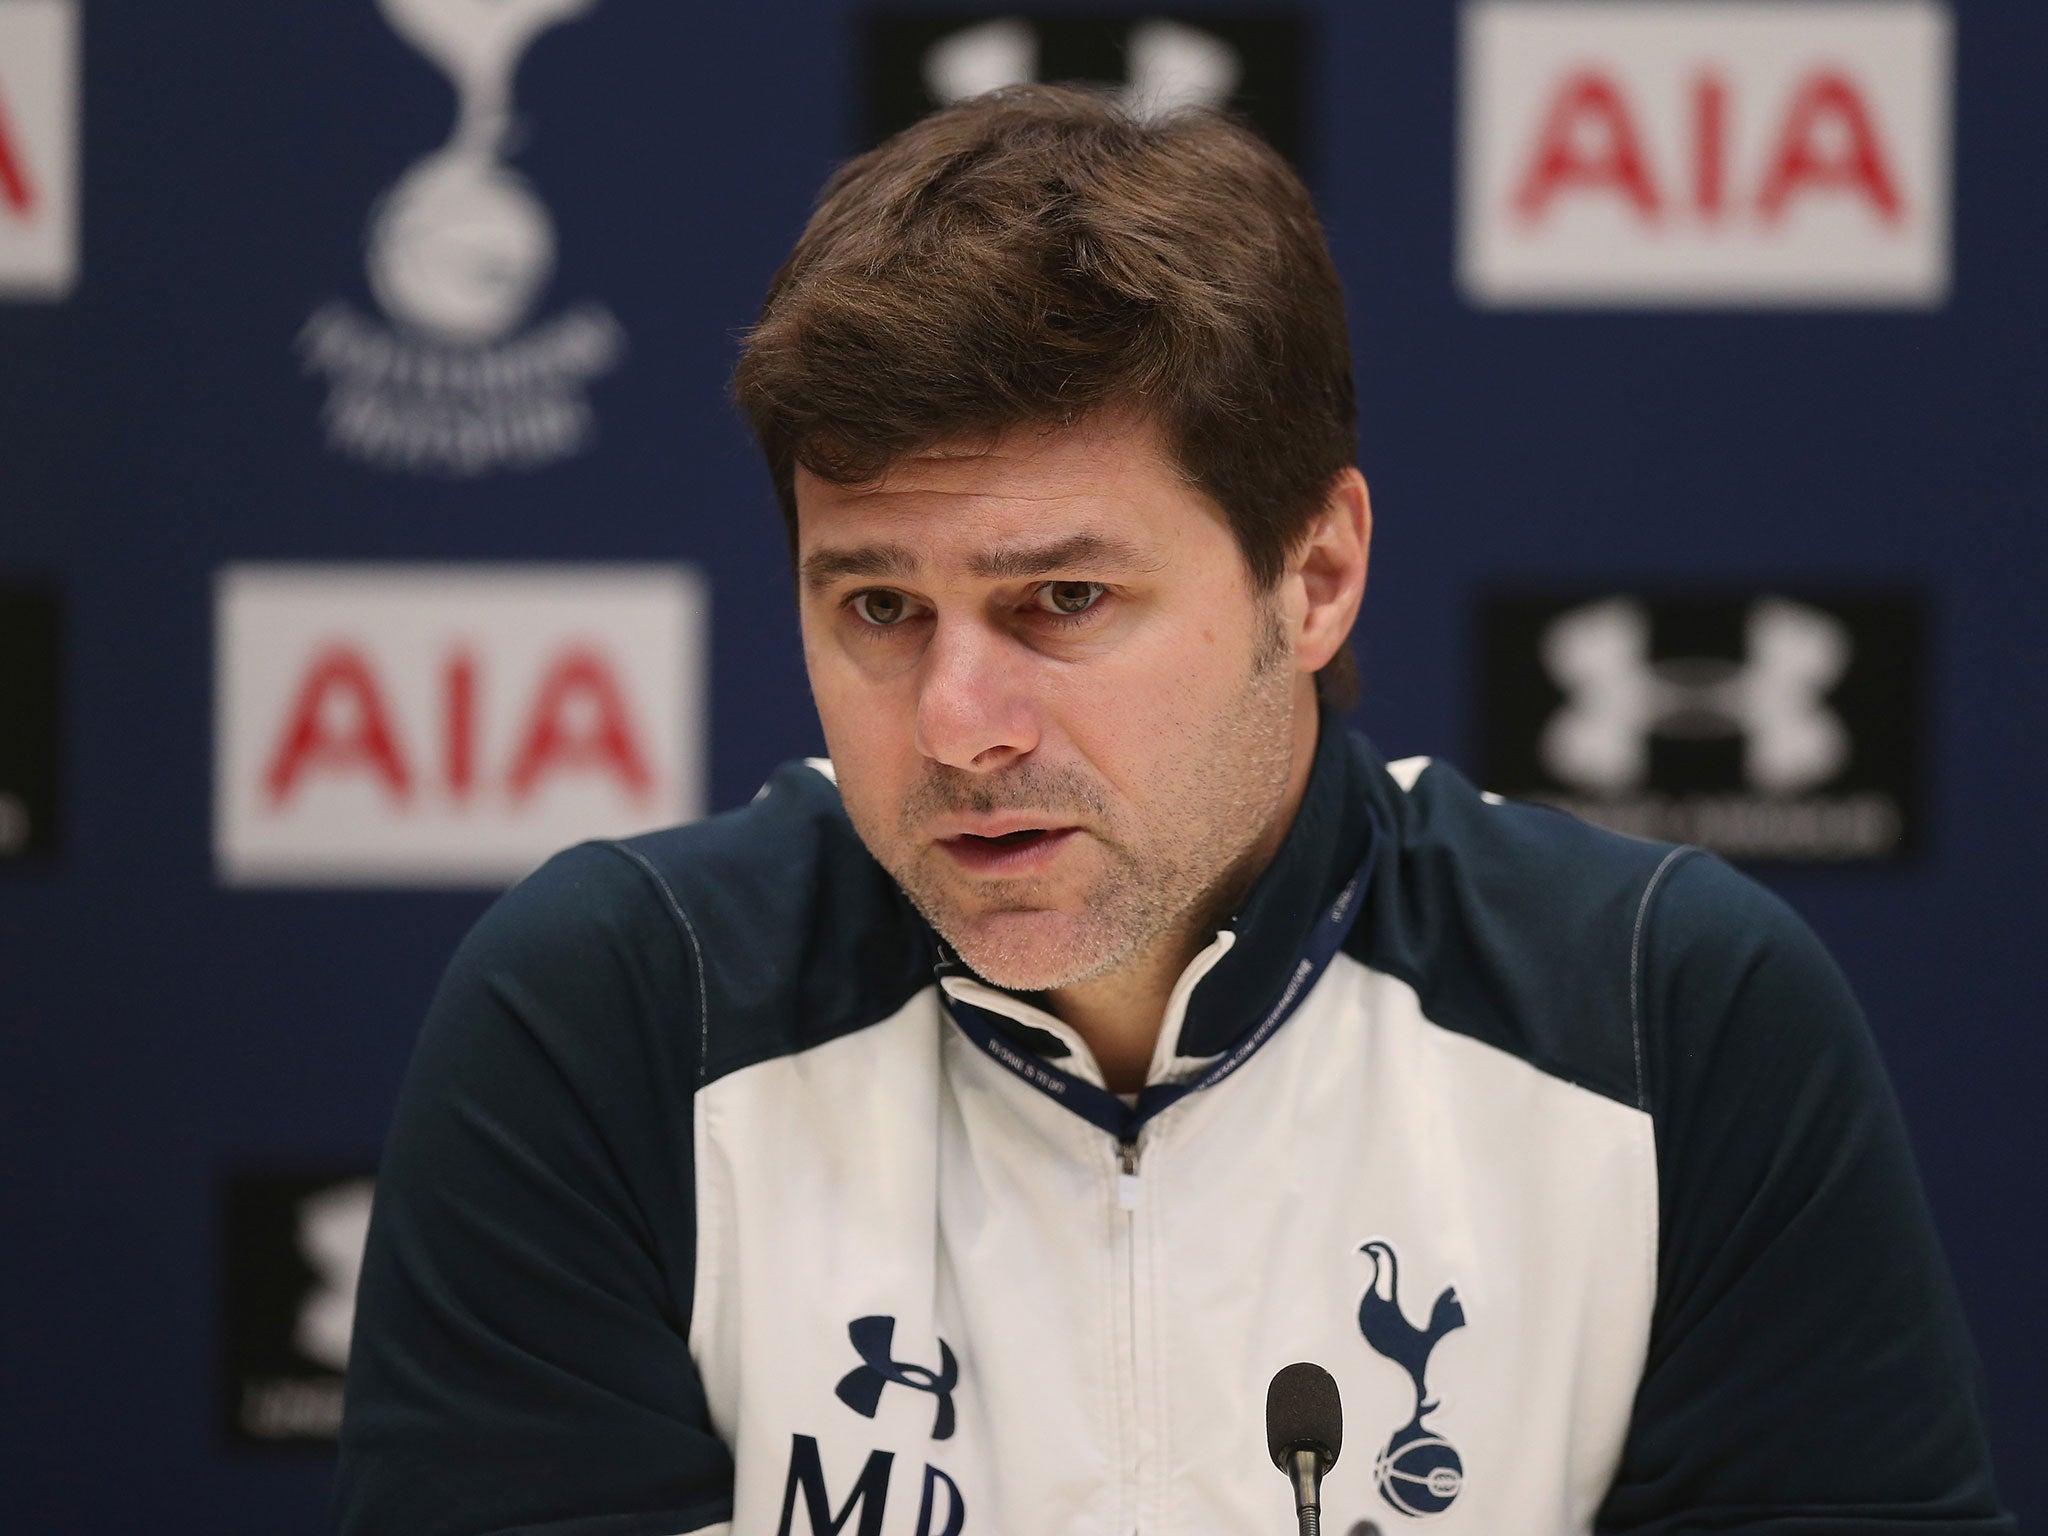 Pochettino's side have lost just three of their last 12 games across all competitions